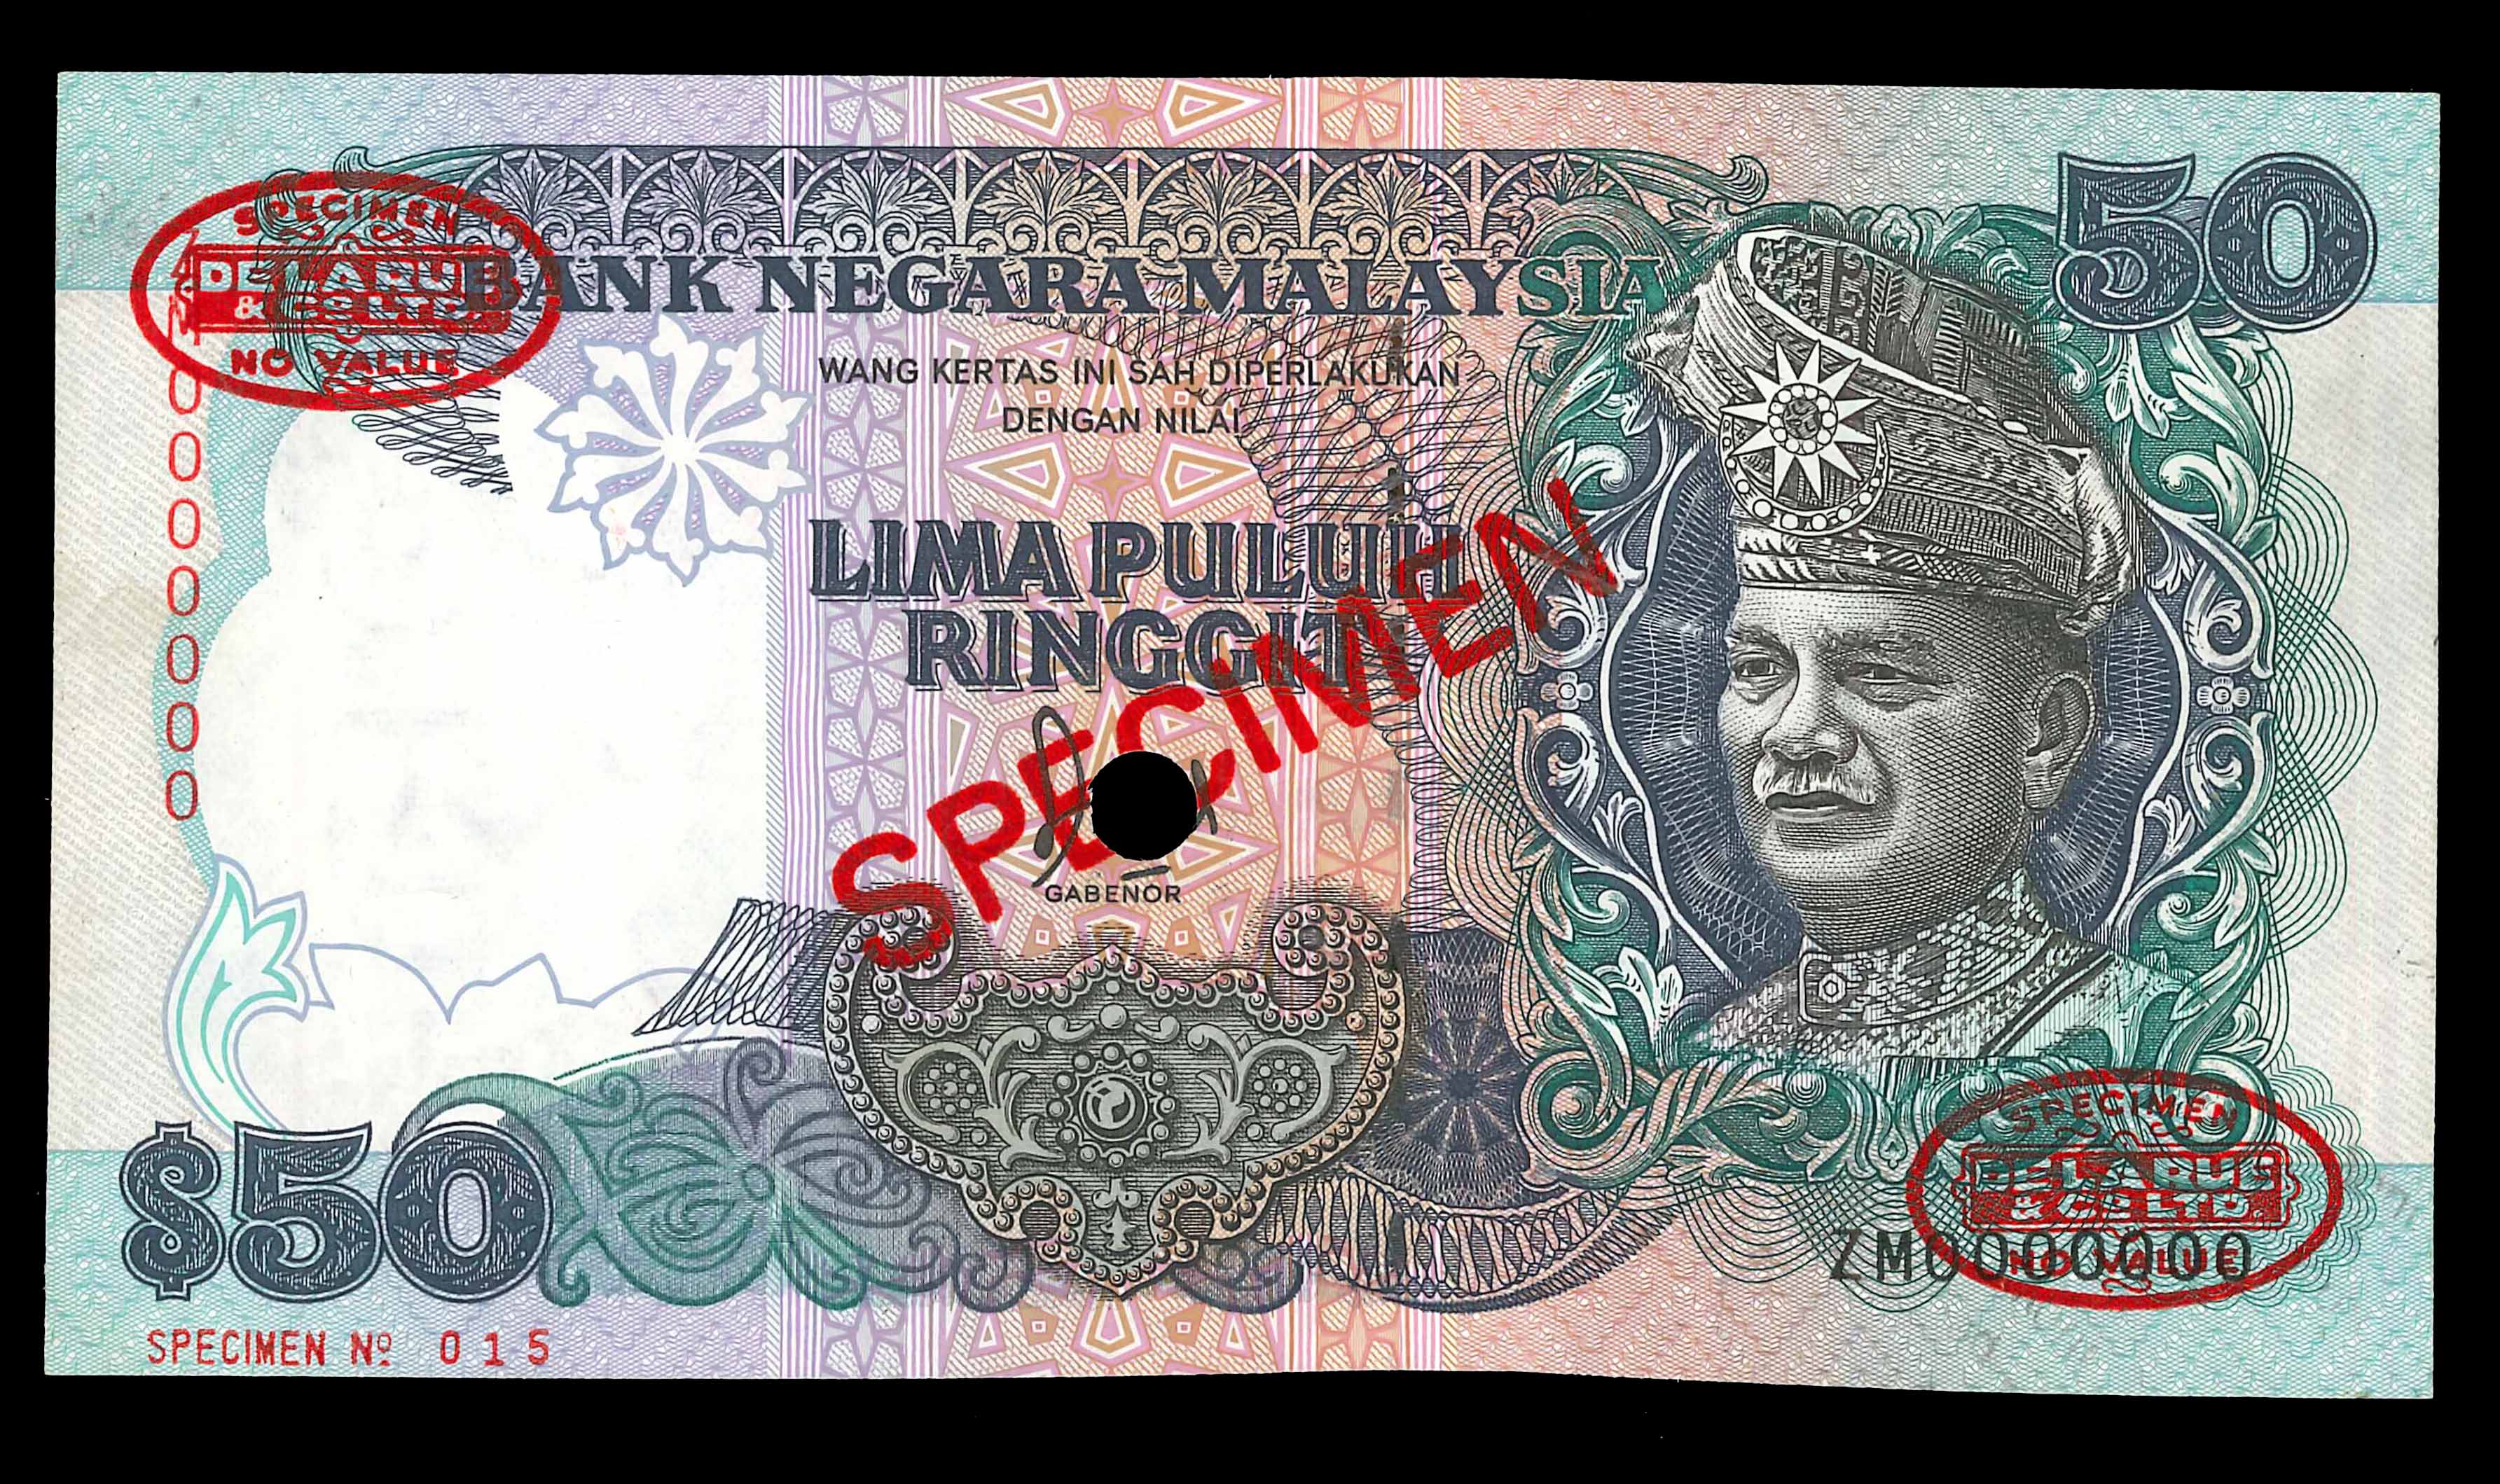 Malaysia, 6th series, 1986-95, 50 Ringgit, P-31s, S/N. ZM 0000000 